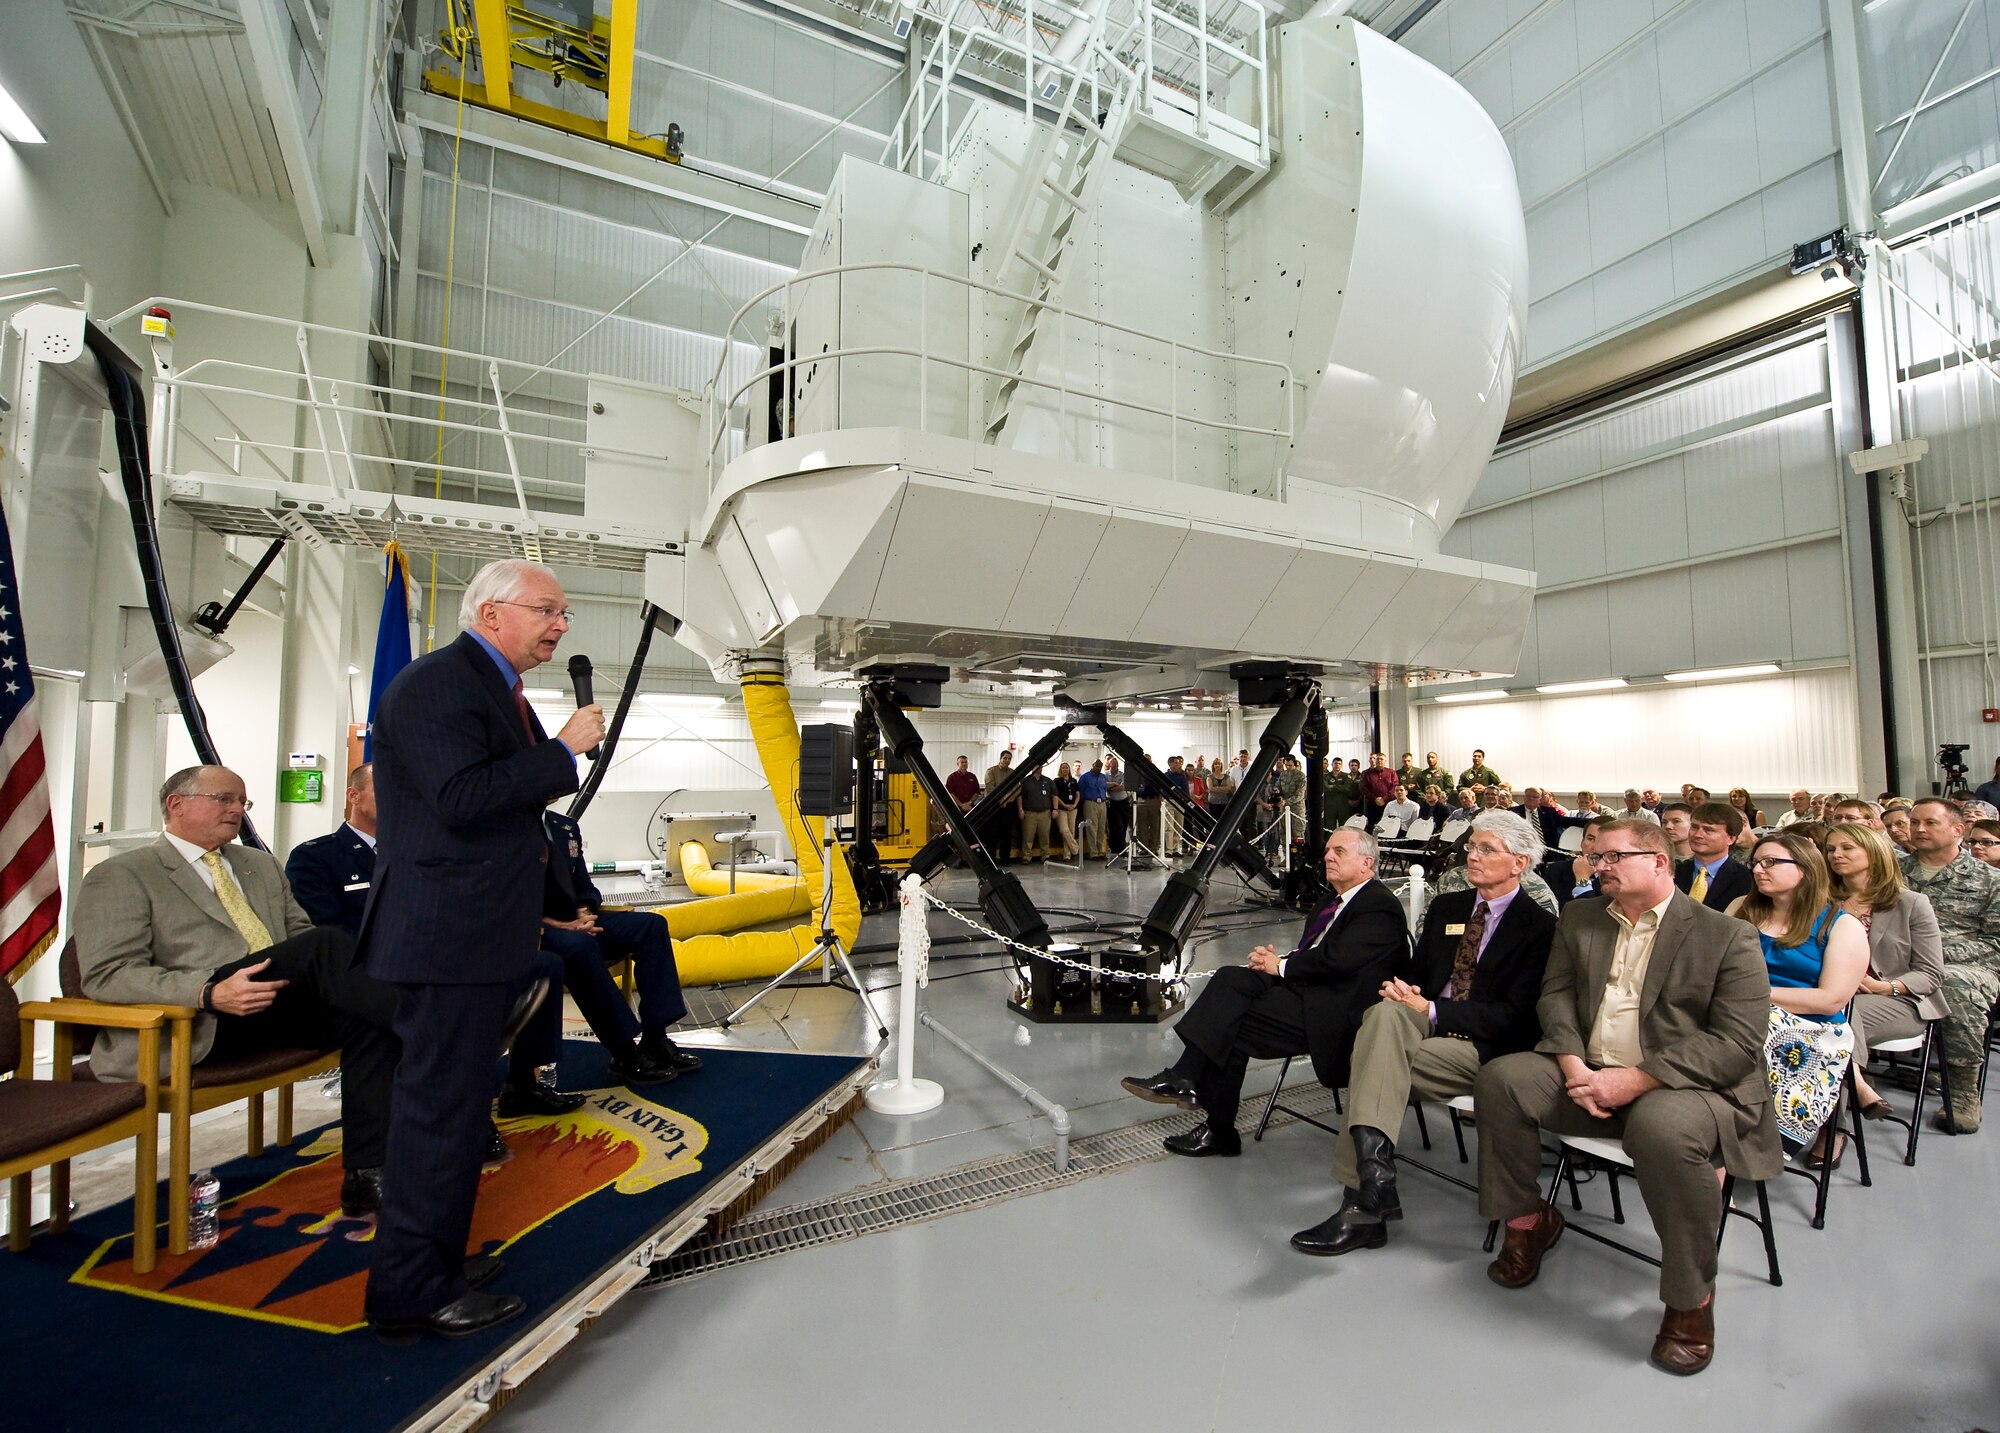 U.S. Representative Randy Neugebauer speaks at the dedication ceremony for the new C-130J Super Hercules simulator April 22, 2014, at Dyess Air Force Base, Texas. Dyess is the first installation to receive this modern C-130J simulator with Vital-10 technology. Vital-10 is an advanced visual display package with a higher resolution and a more realistic display. System benefits include the ability to accomplish initial and recurring qualifications for missions, such as the Joint Precision Airdrop System and Heavyweight Assault Landings. (U.S. Air Force photo/Staff Sgt. Richard Ebensberger)
 